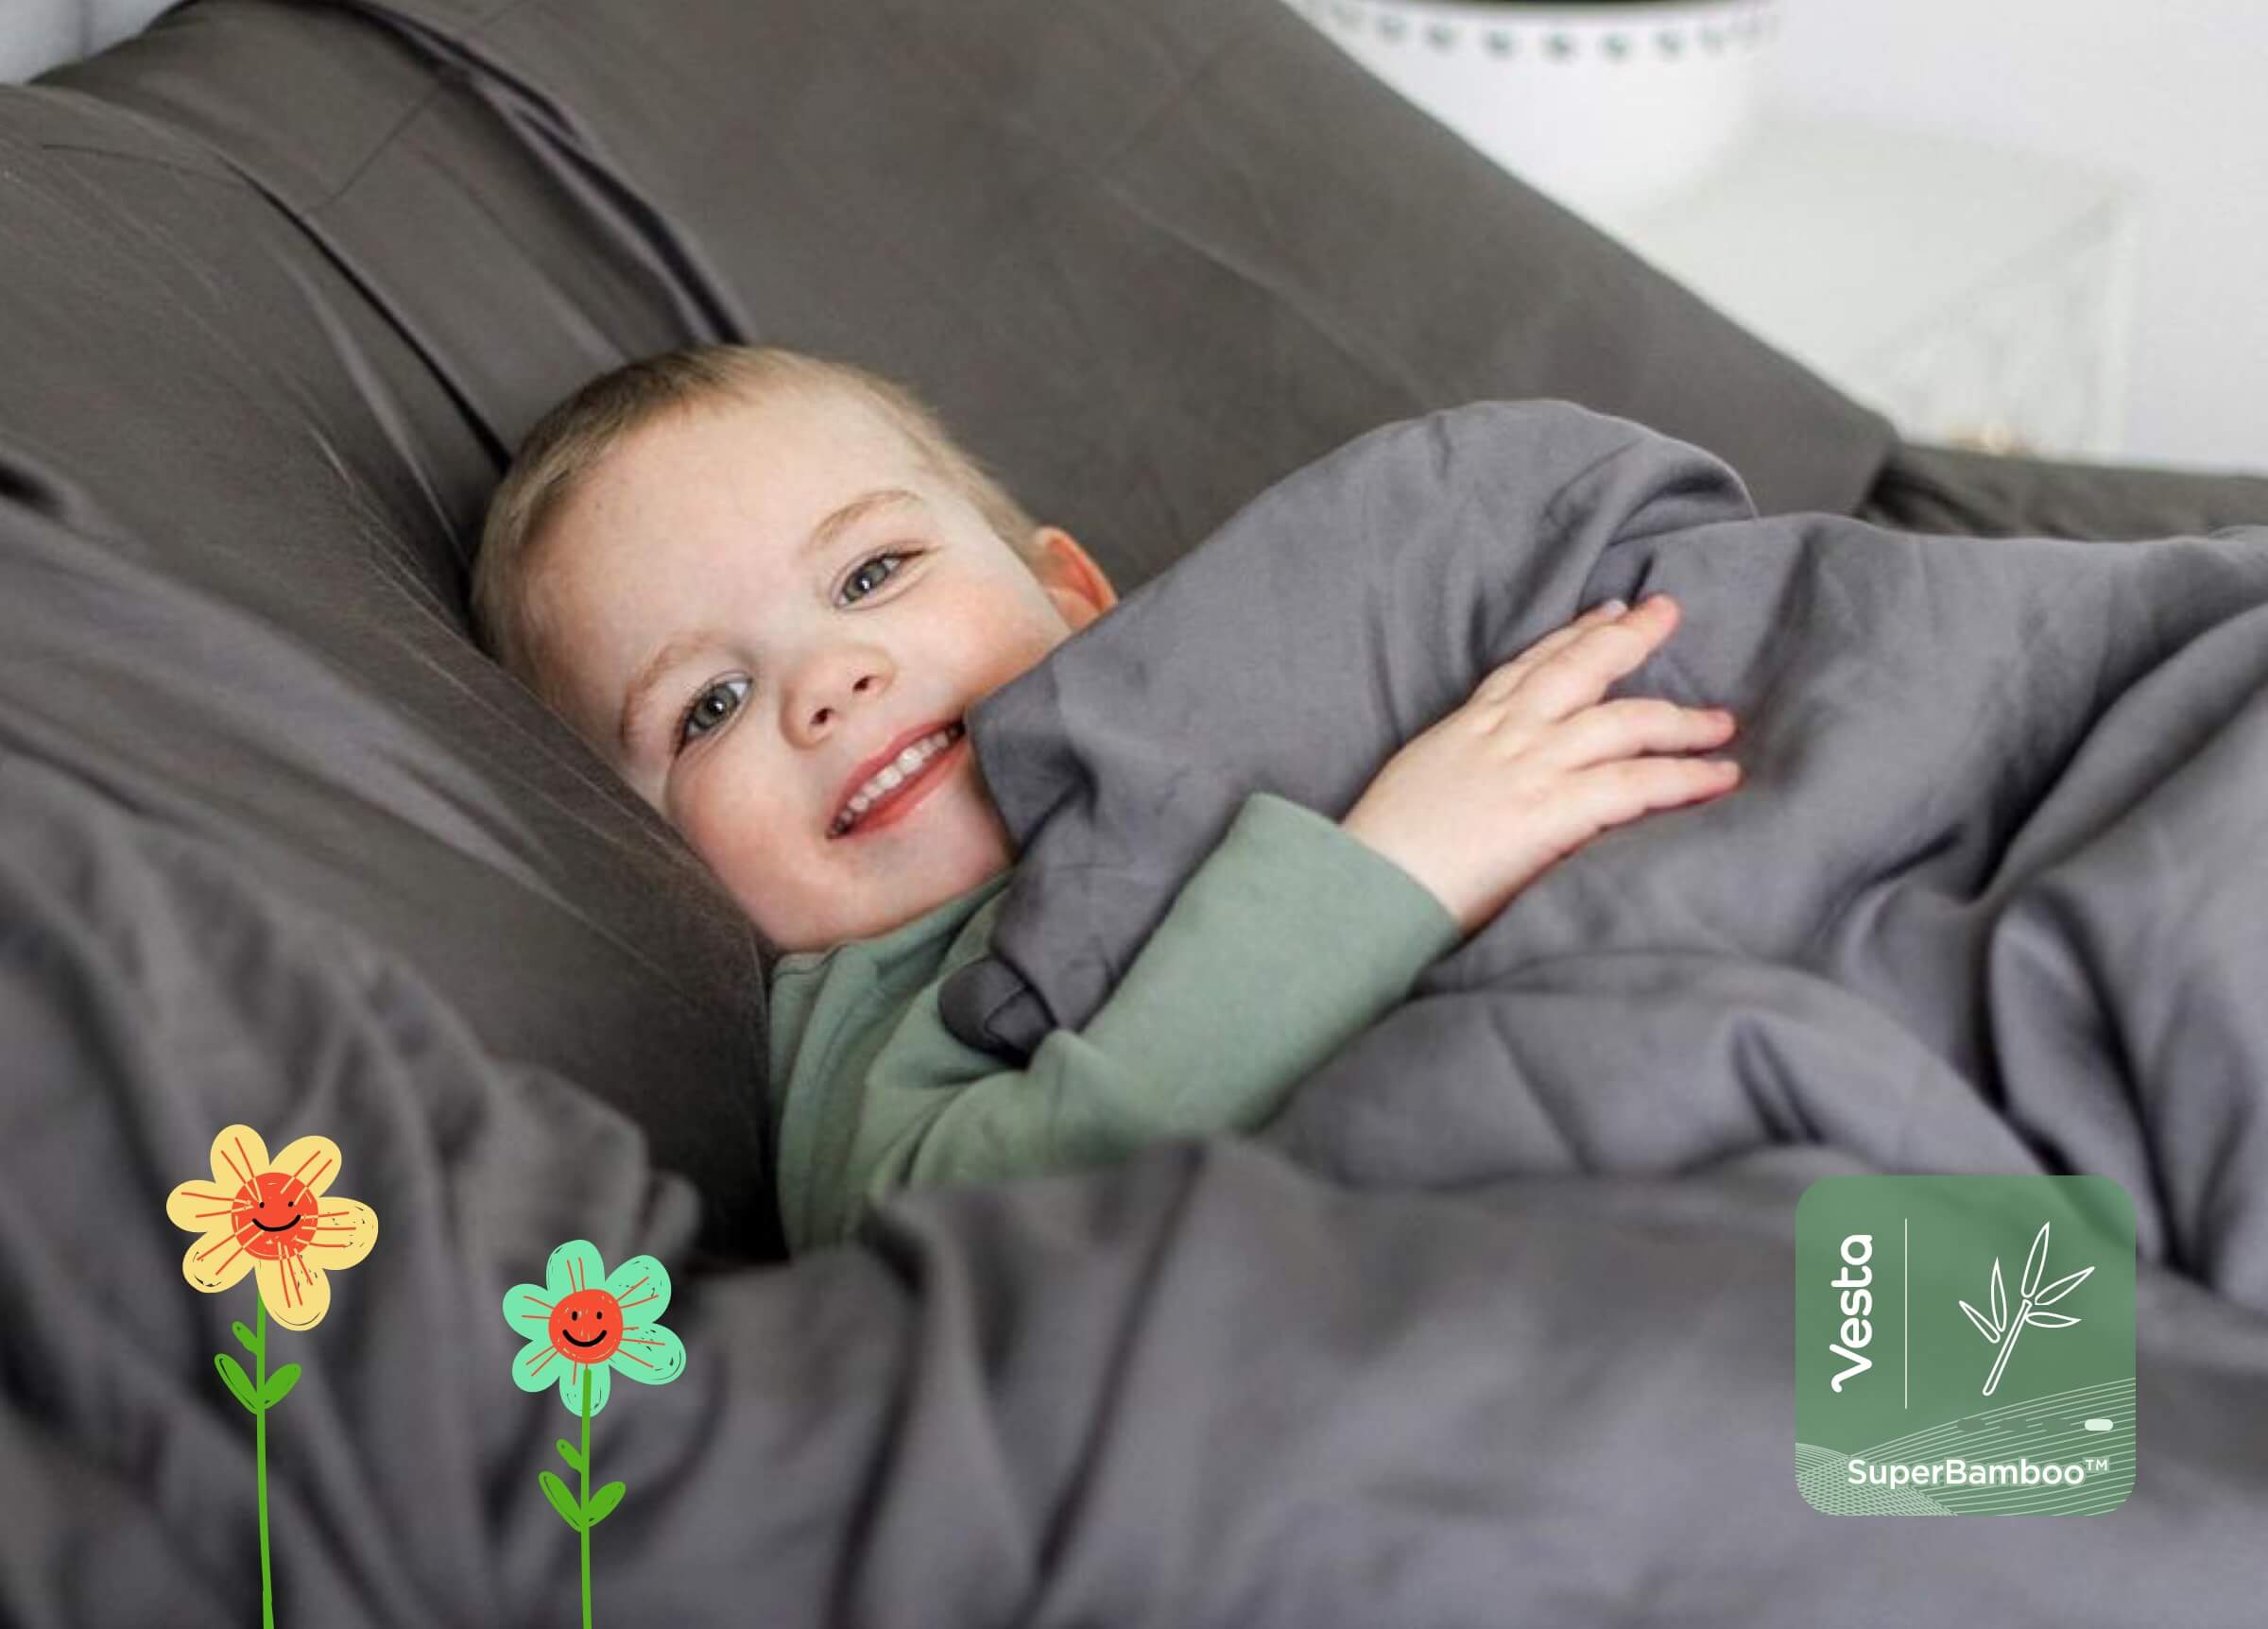 SuperBamboo™ Duvet Cover for Kids | Sustainable Duvets, Sheets and